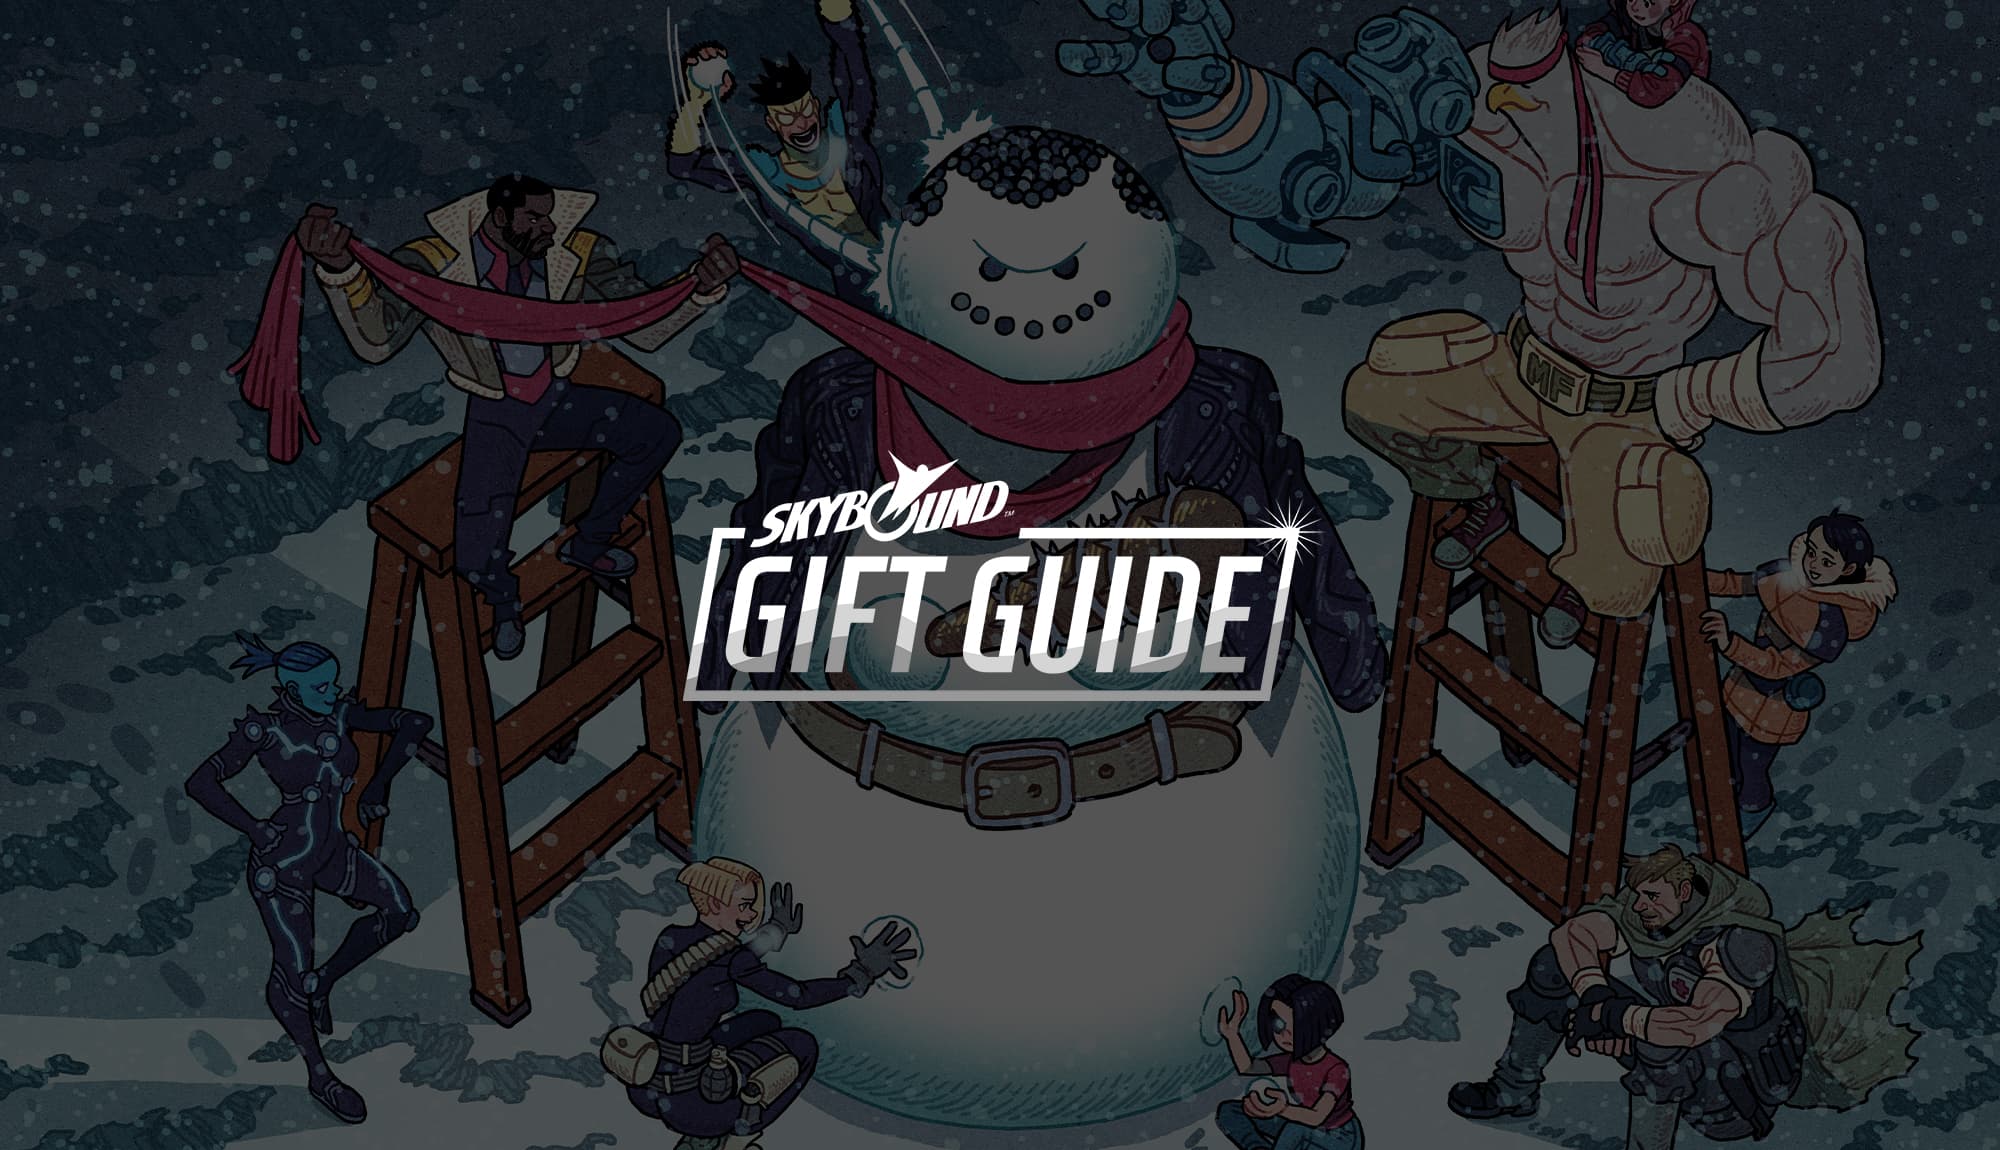 The Official Skybound/Walking Dead Gift Guide 2019